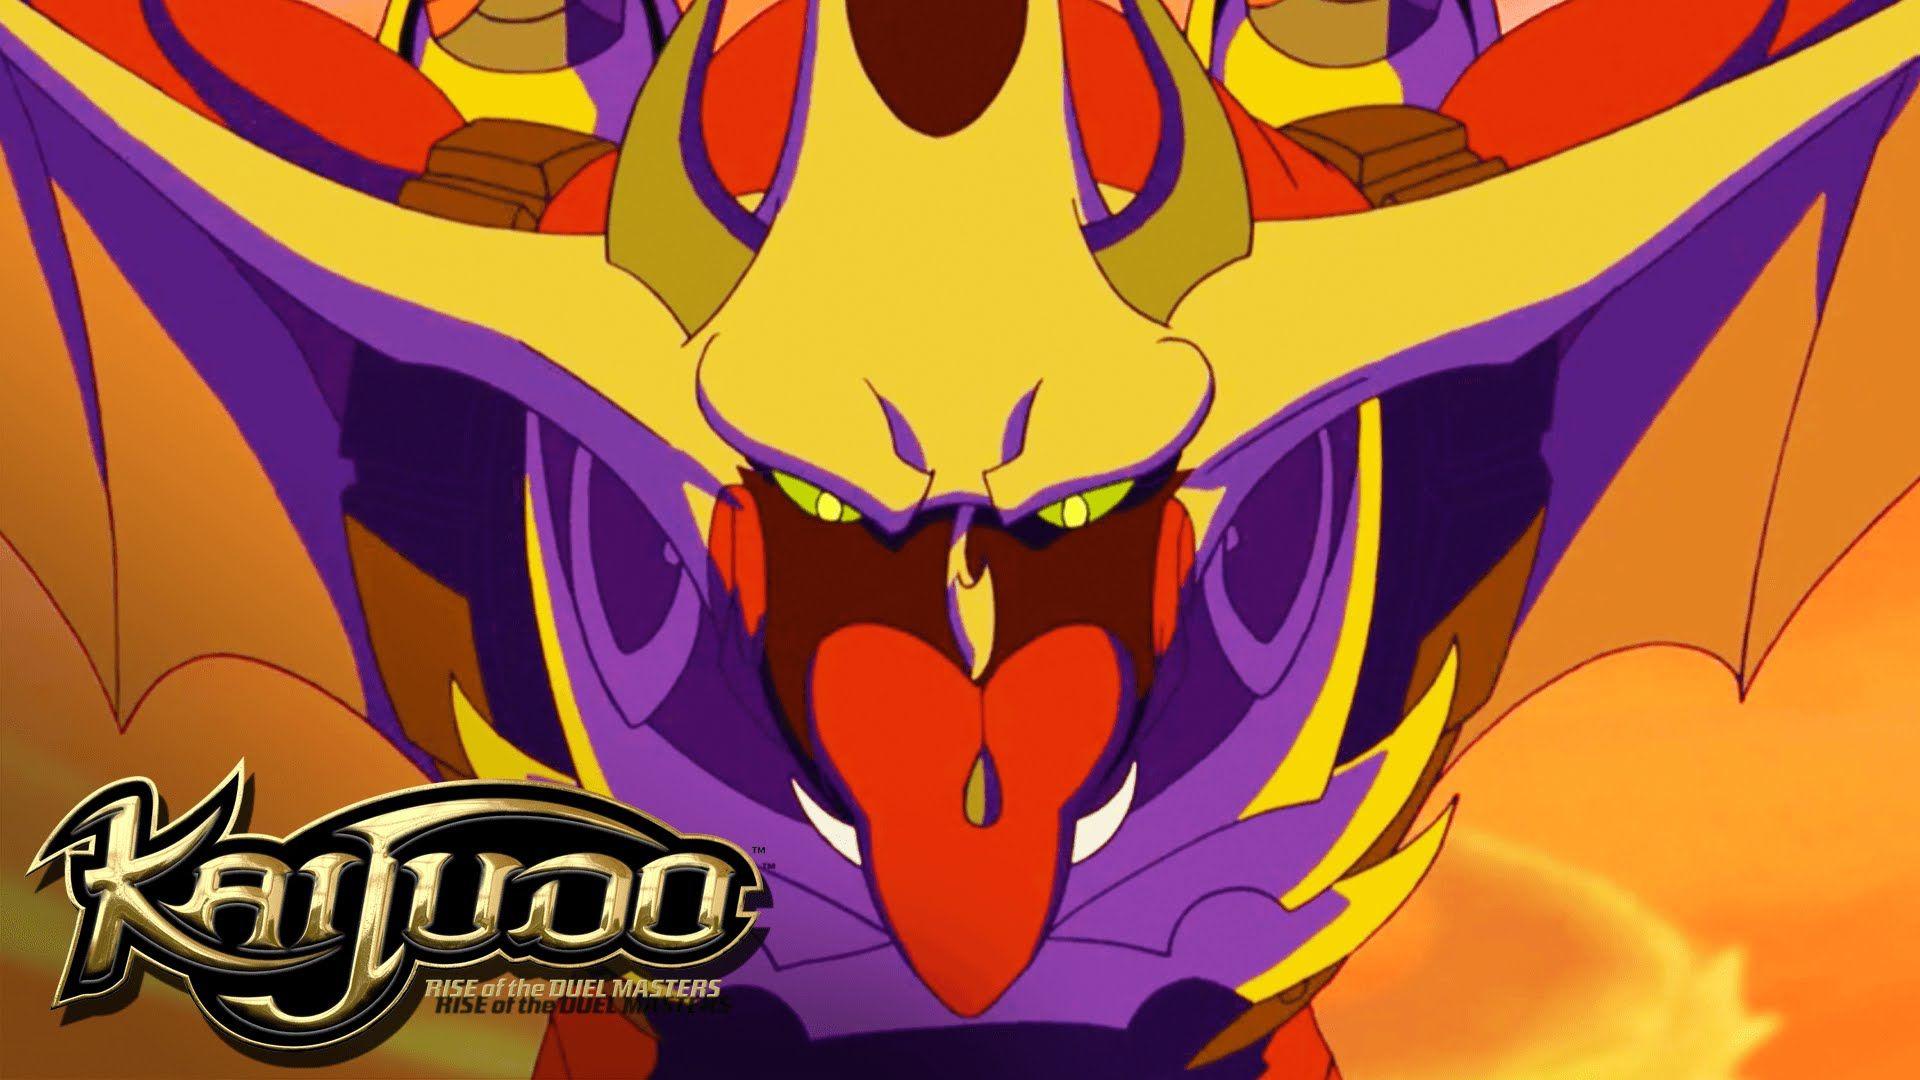 Kaijudo: Rise of the Duel Masters Didn't Miss You